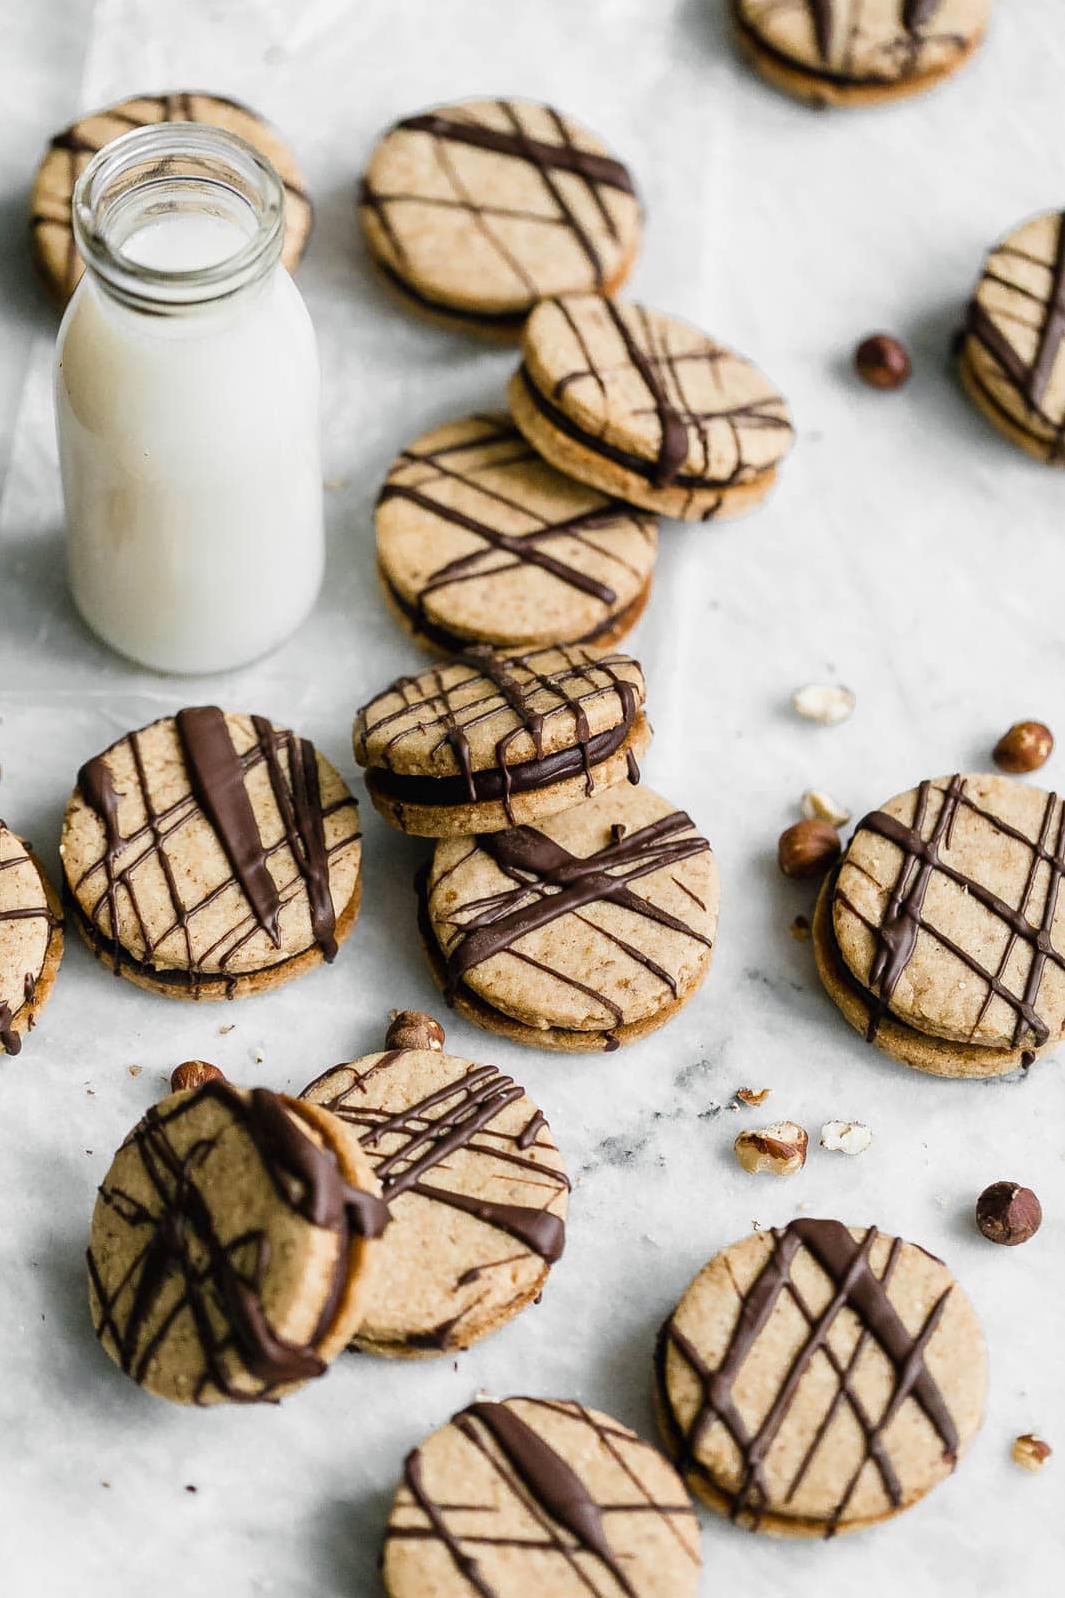  These Hazelnut Espresso Cookies pair perfectly with a cup of hot coffee or tea.